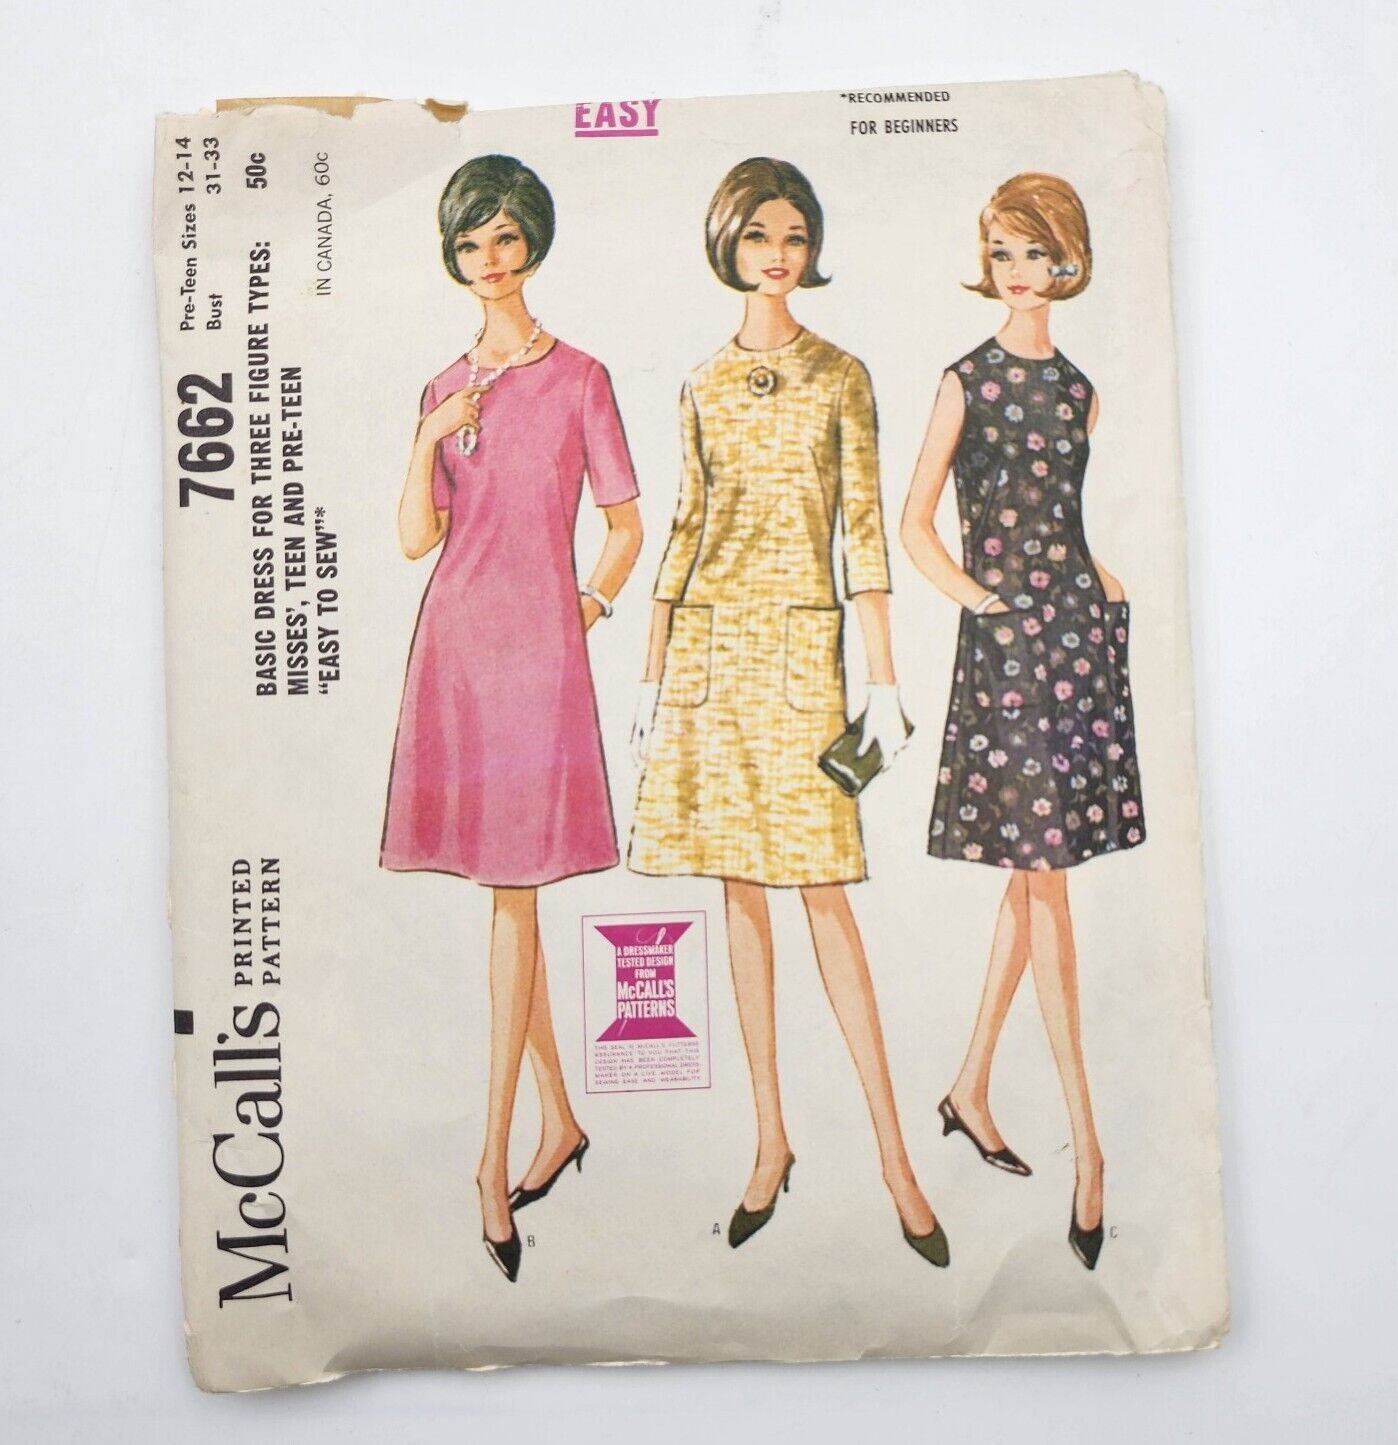 Vintage 1964 McCalls Sewing Pattern 7662 Fit and Flare Dress Bust Size 31 - 33 